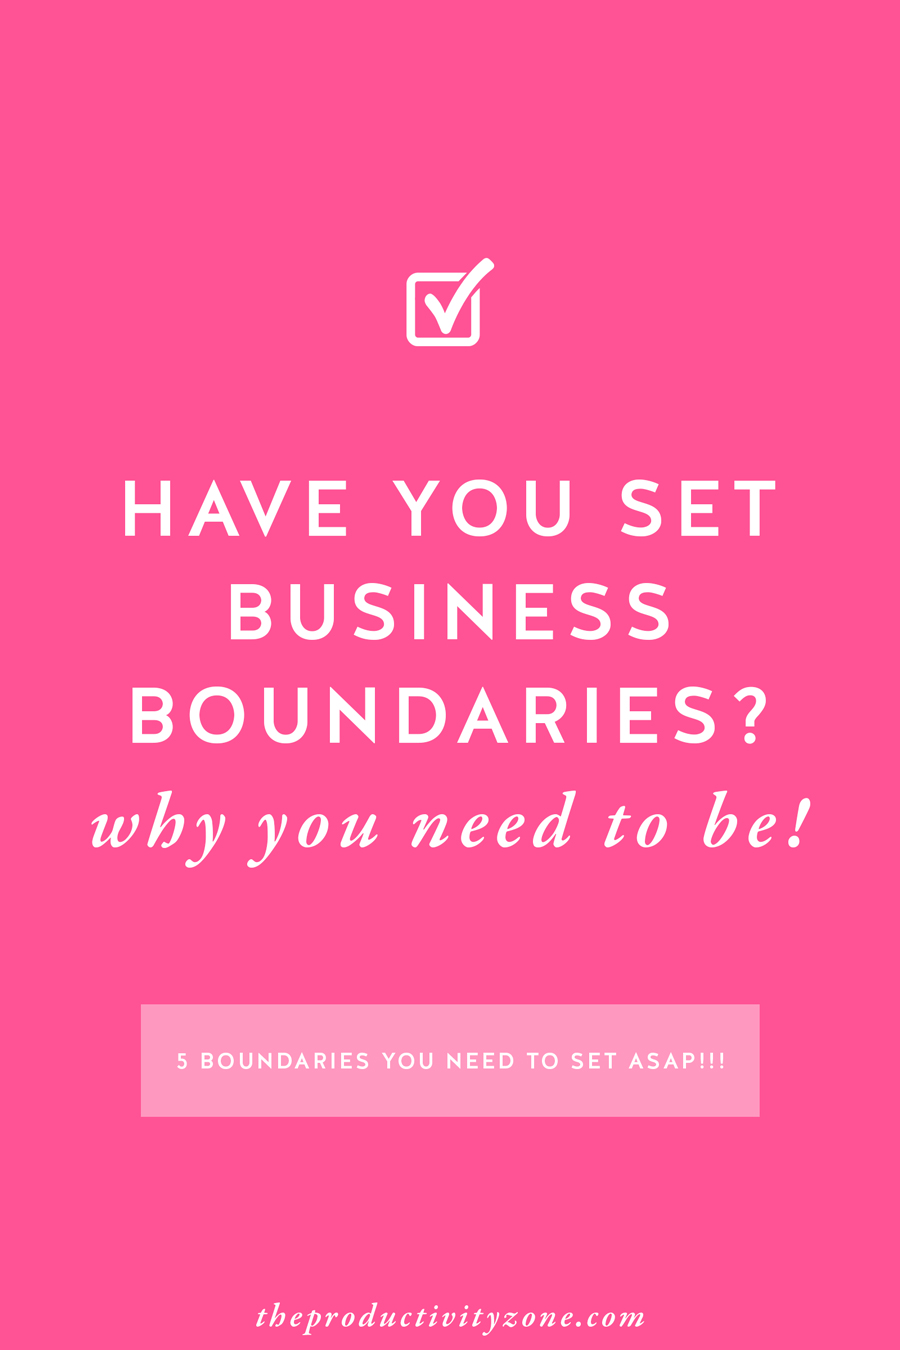 Just because you own a business, does not mean you have to hang a 24/7 sign on your brick and mortar or virtual door. The 5 business boundaries you need to set ASAP and WHY on The Productivity Zone!!